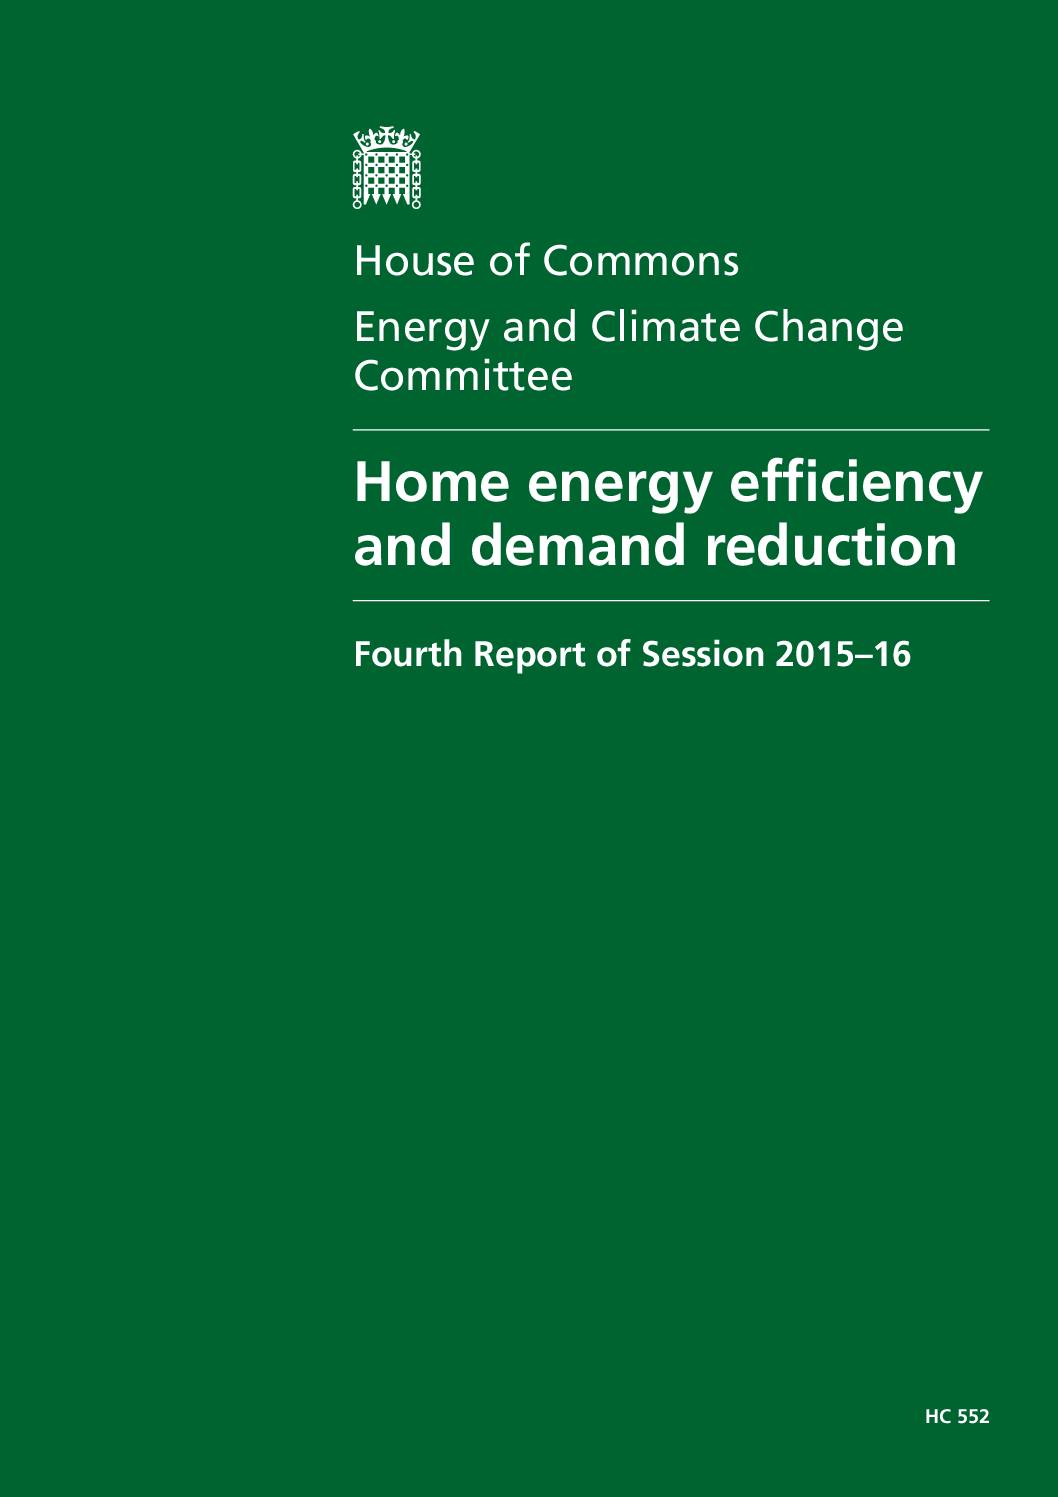 Home energy efficiency and demand reduction